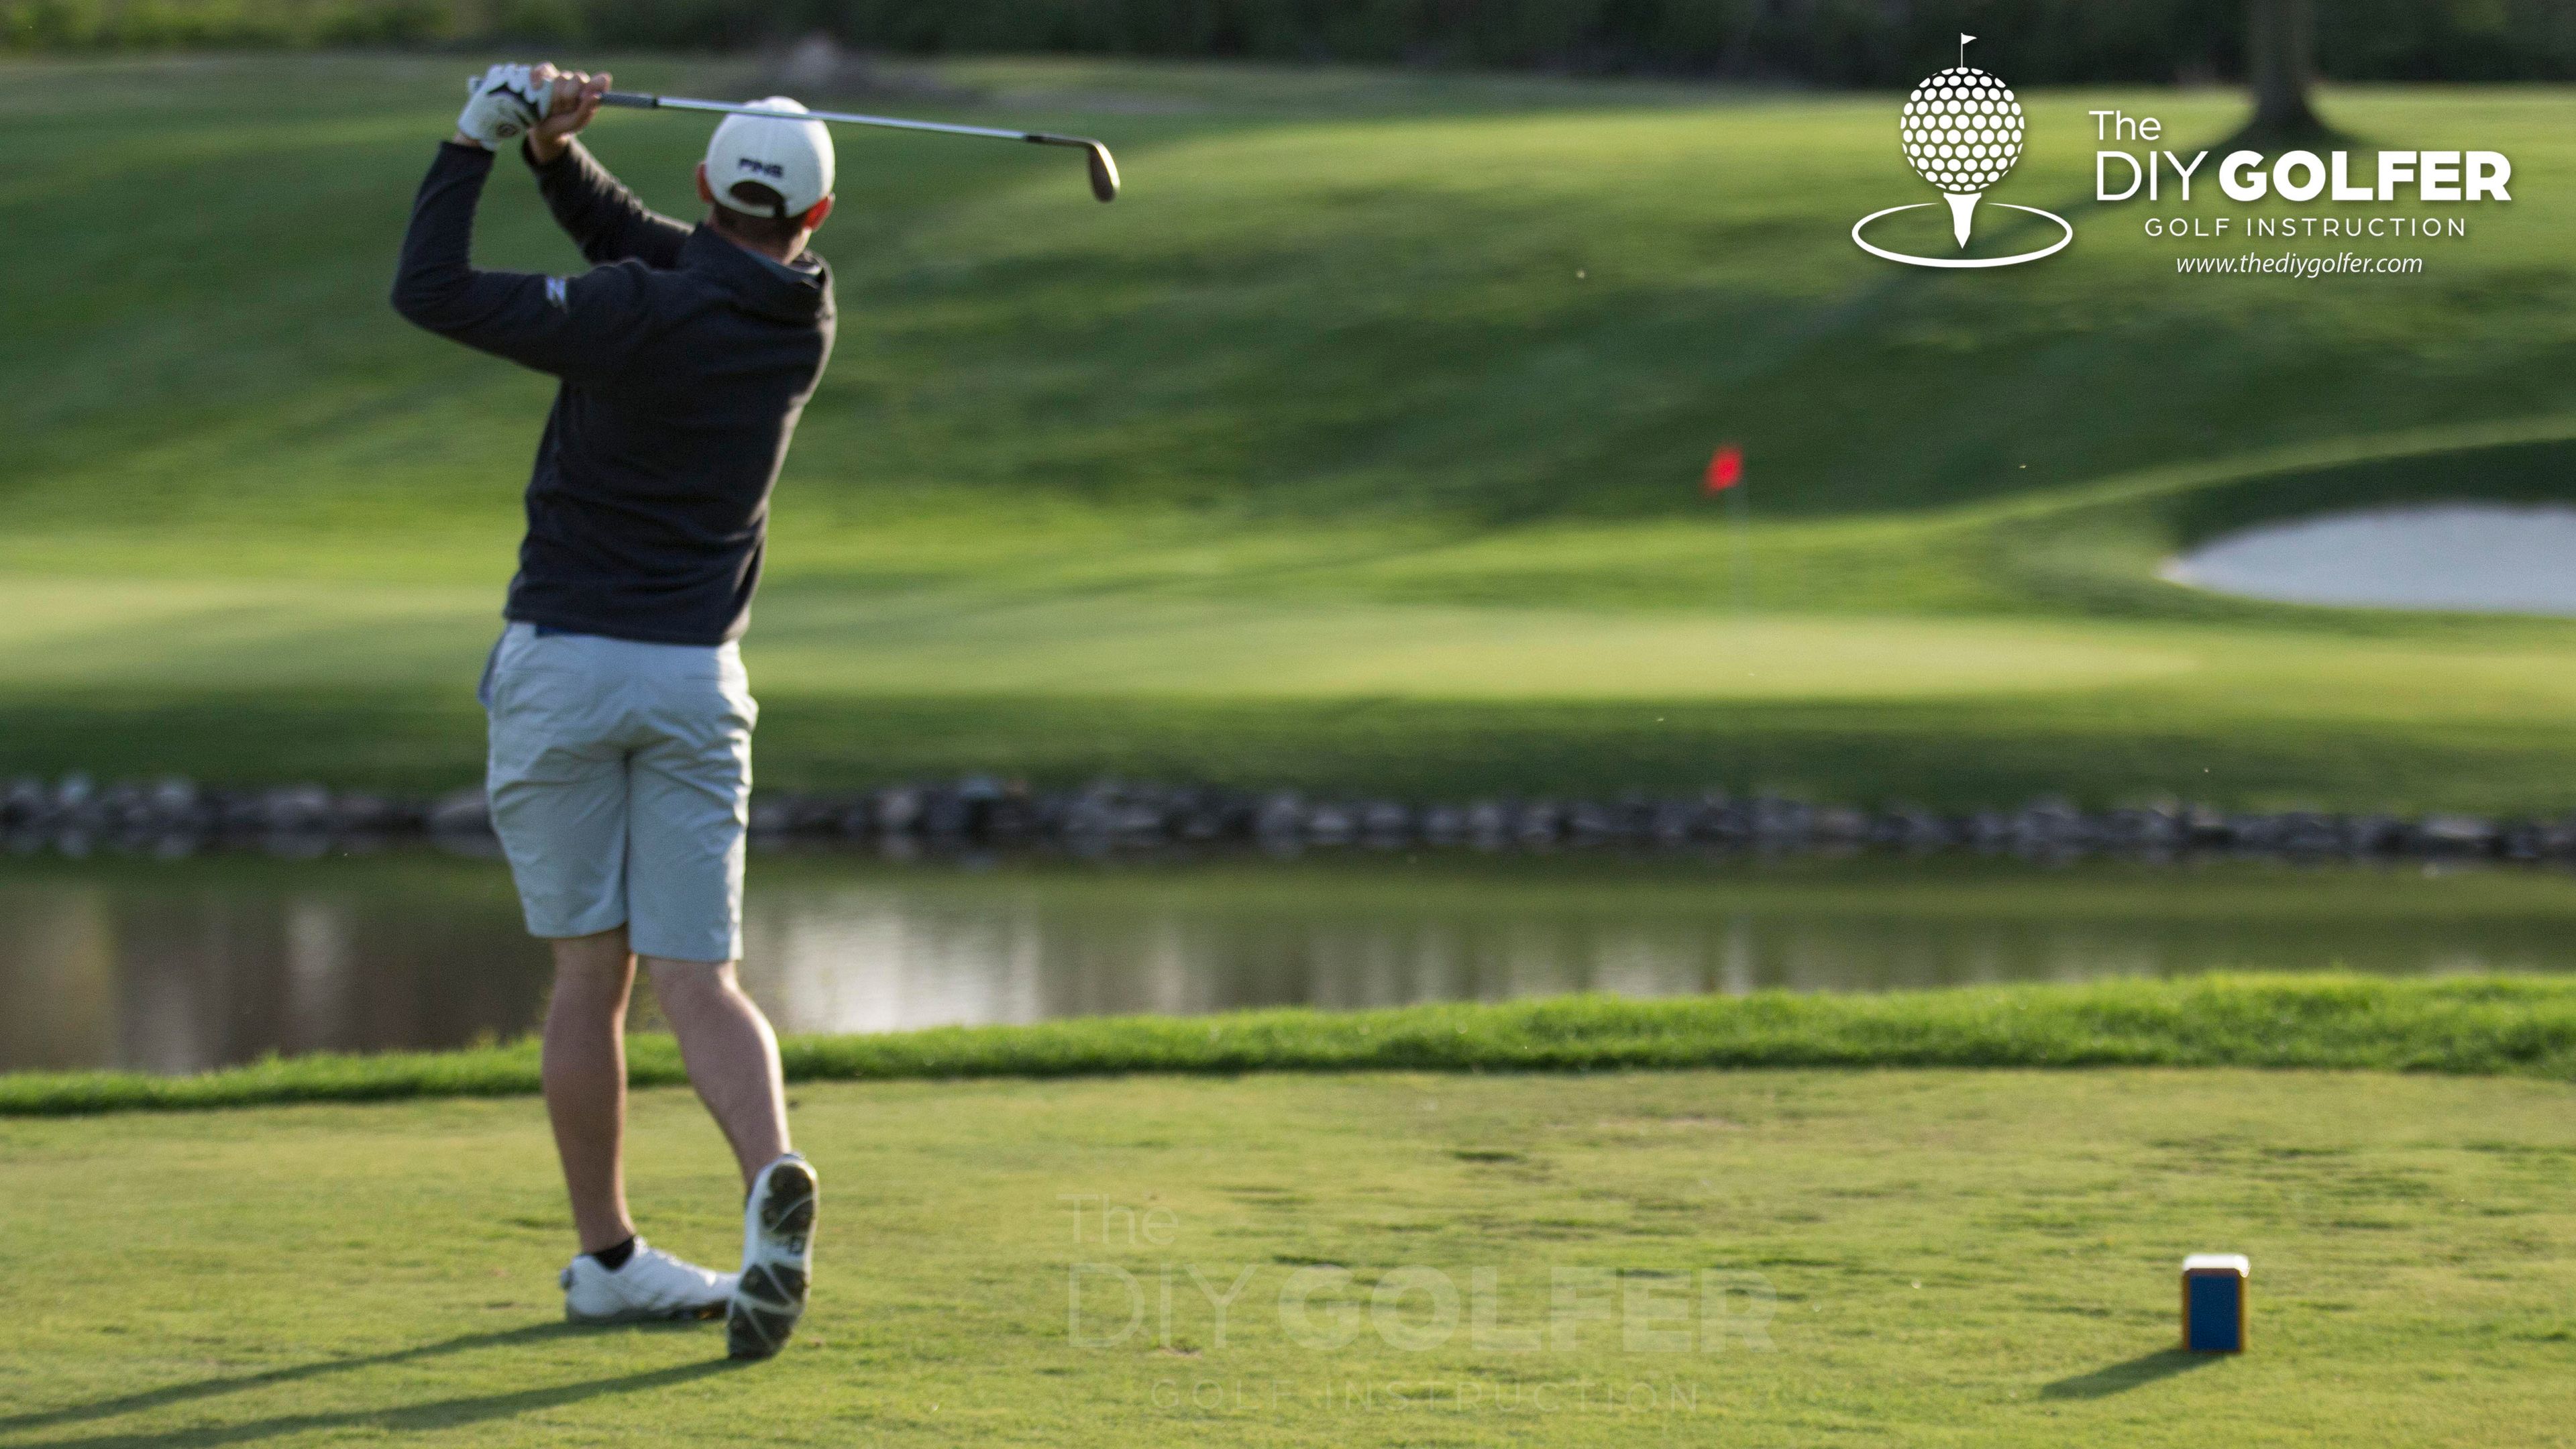 Golf Swing Photo: Finish Position on Par 3 Over Water